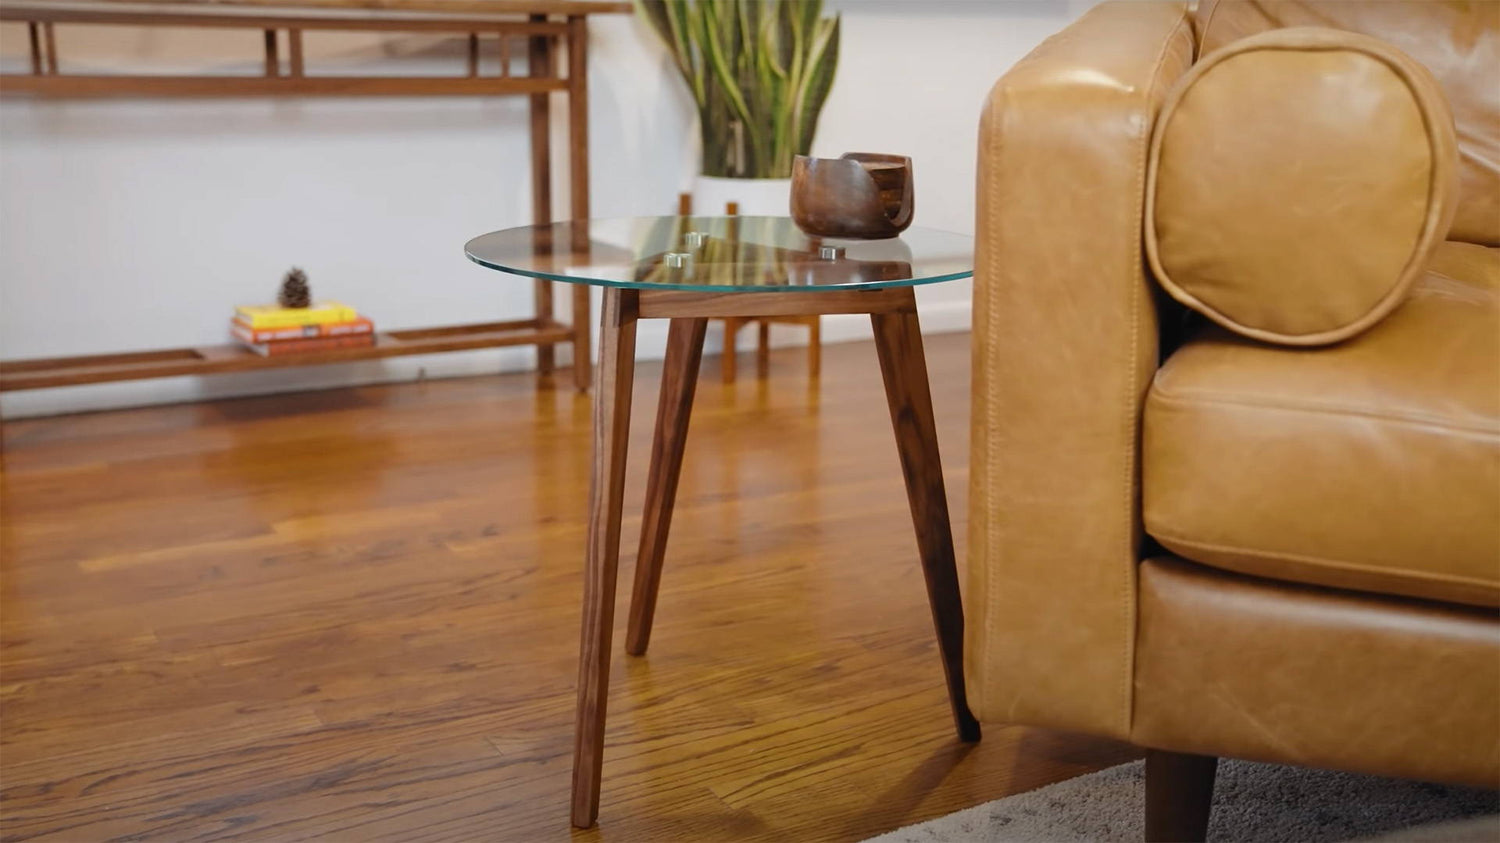 3 Ways to Cut Tapered Legs: Must-Know Furniture Design Technique